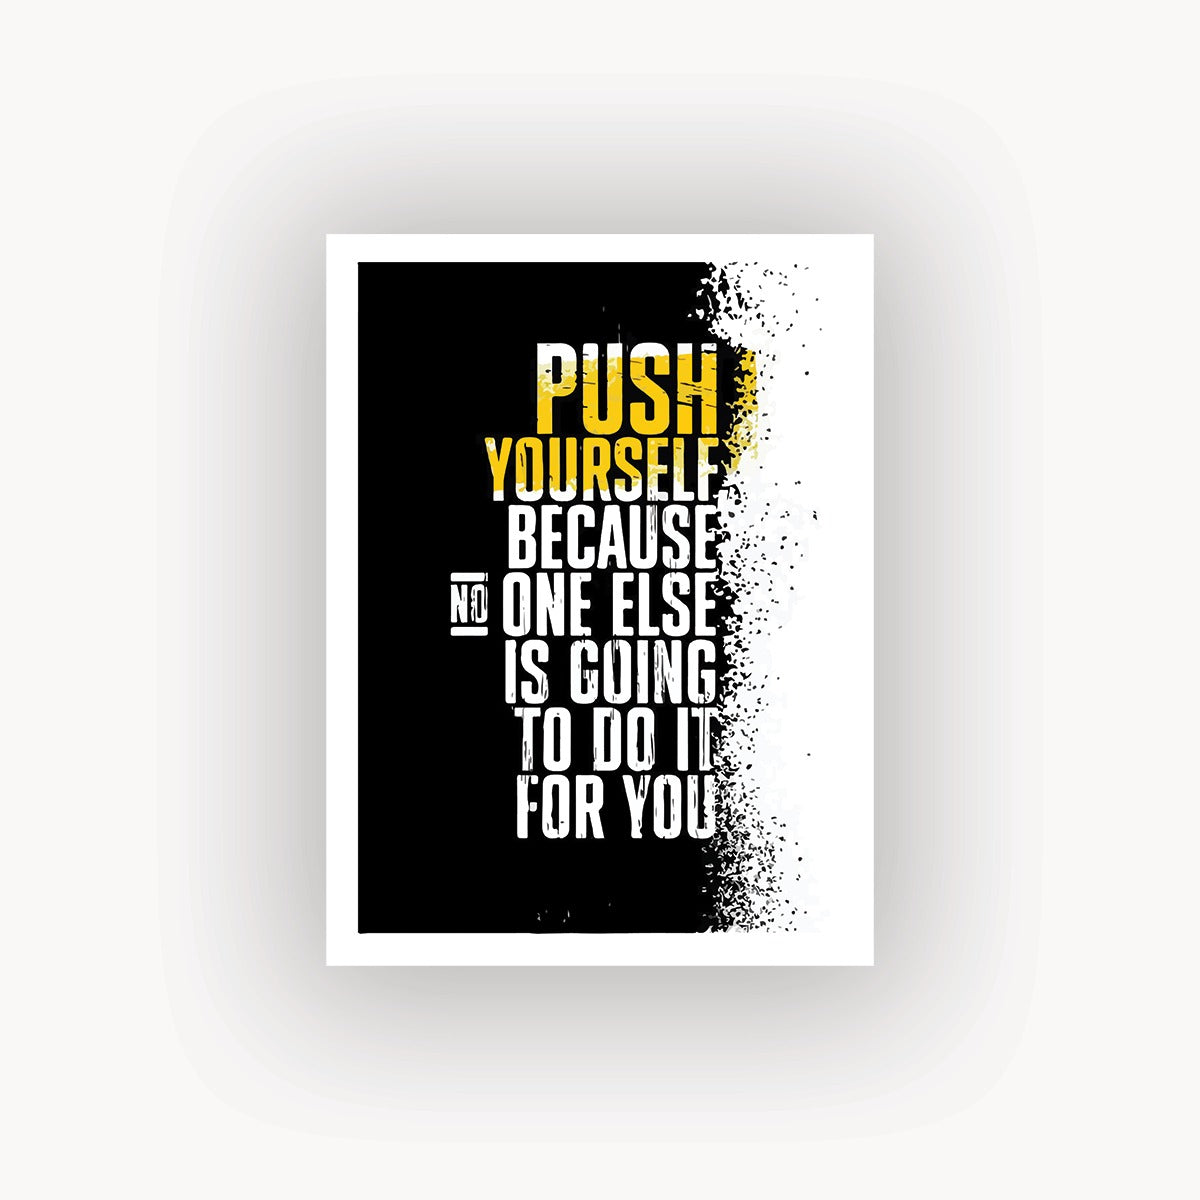 Push yourself because no else is going to do